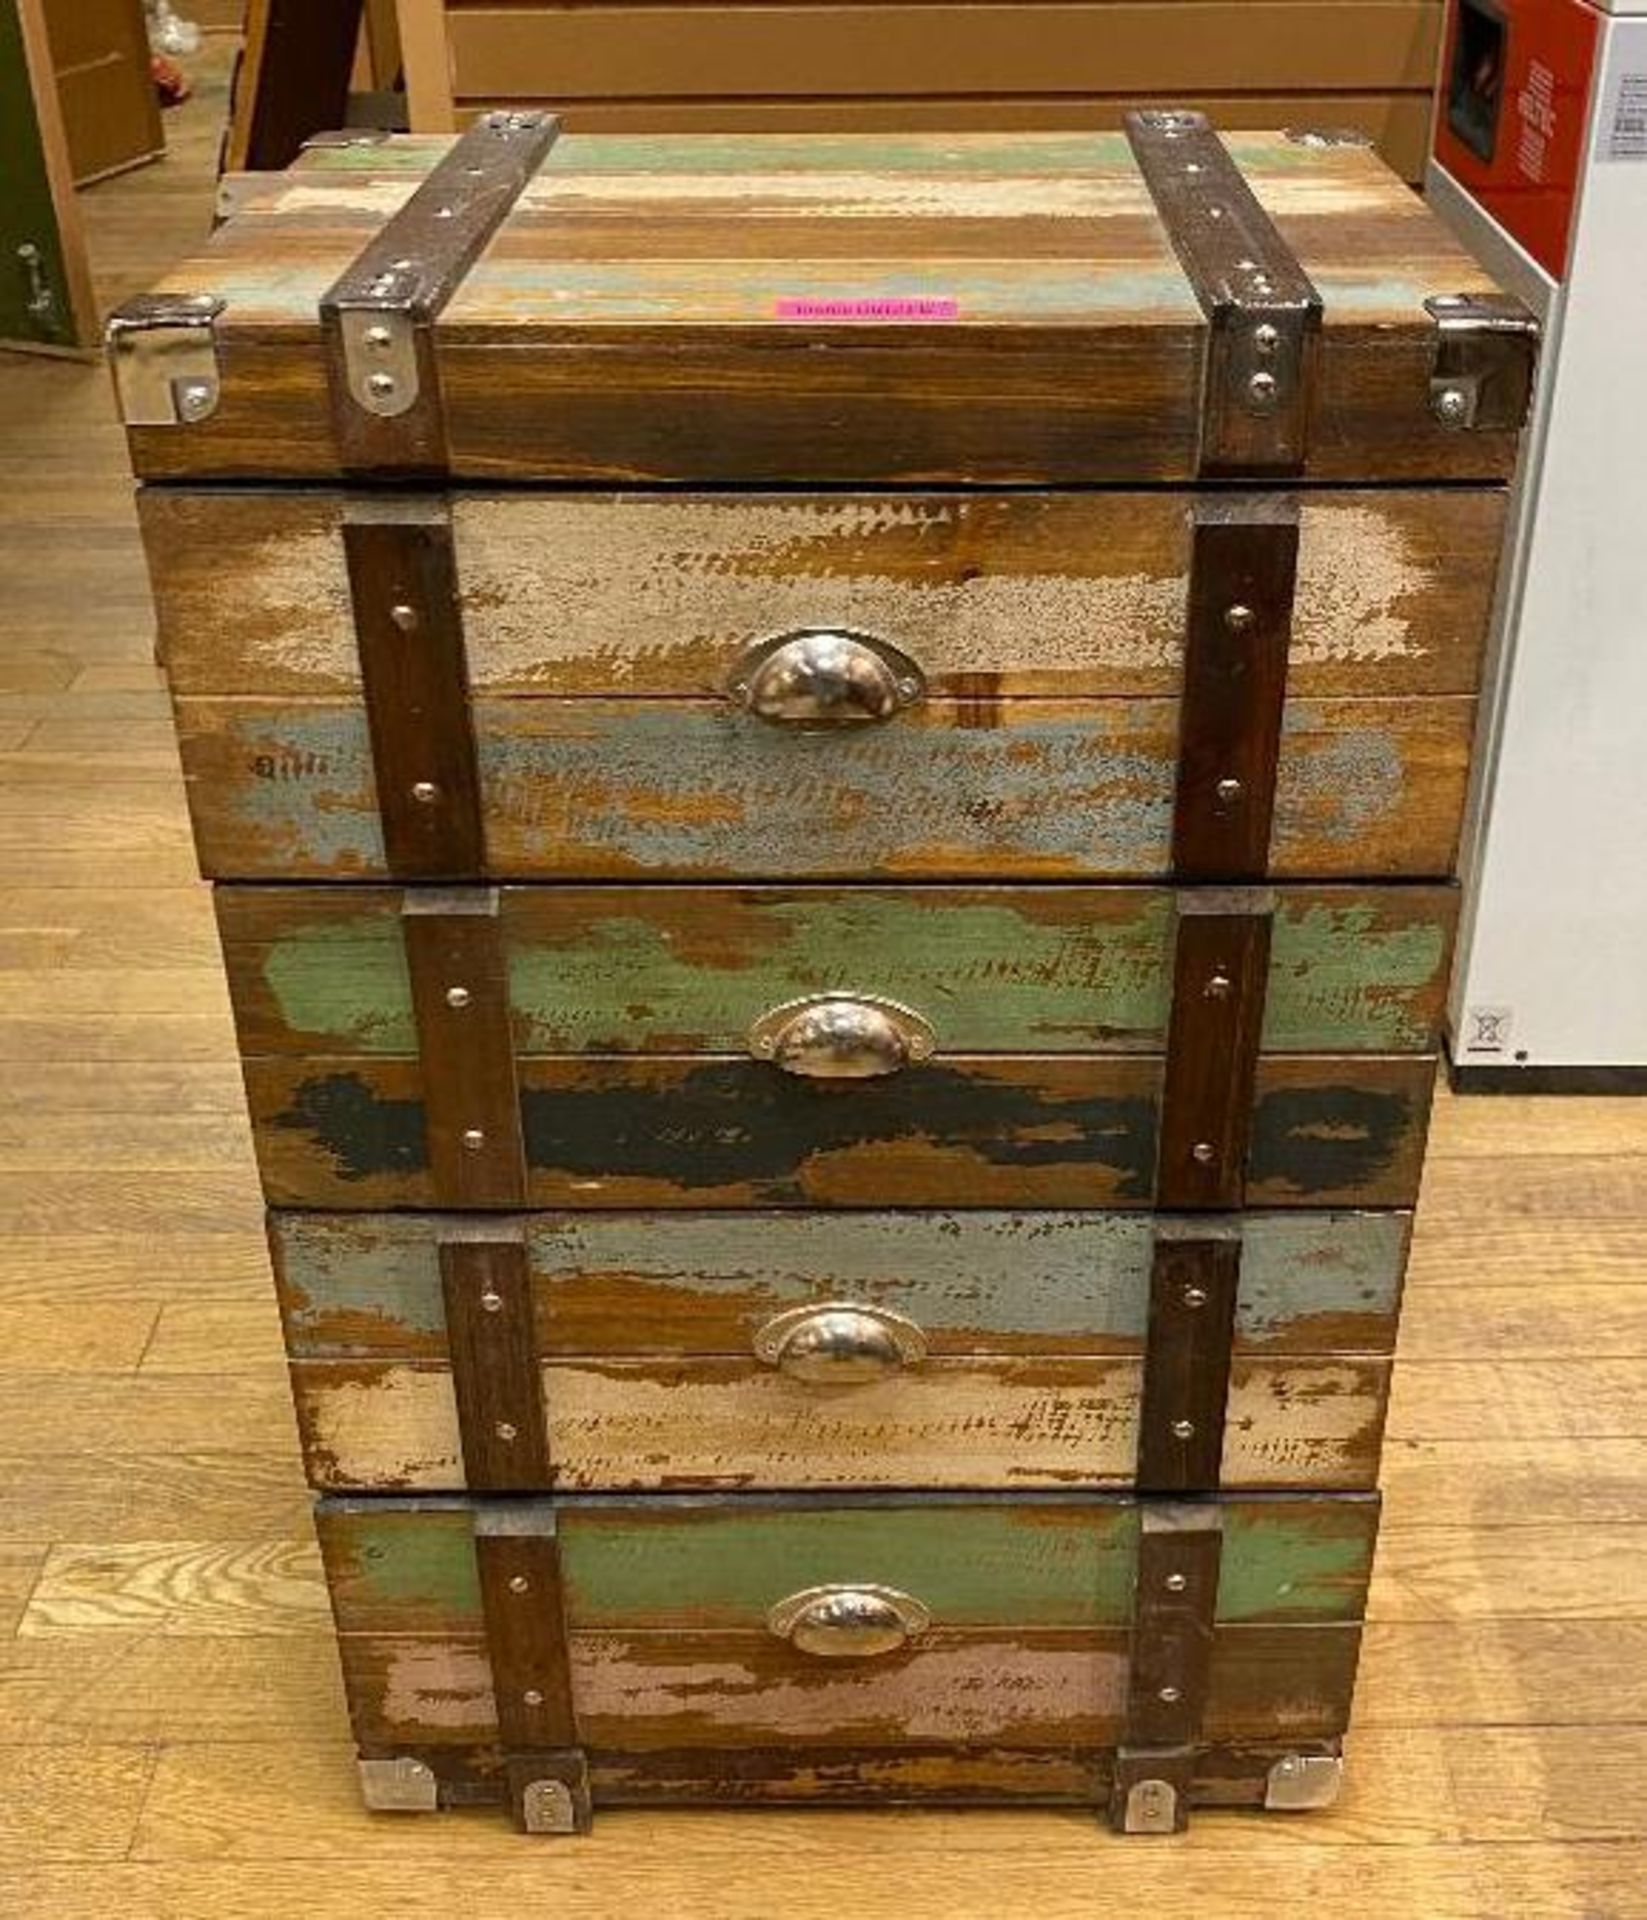 DESCRIPTION (2) VINTAGE STYLE 4-DRAWER WOODEN CHEST SIZE 20" X 14" X 32" LOCATION MAIN LOBBY THIS LO - Image 2 of 7